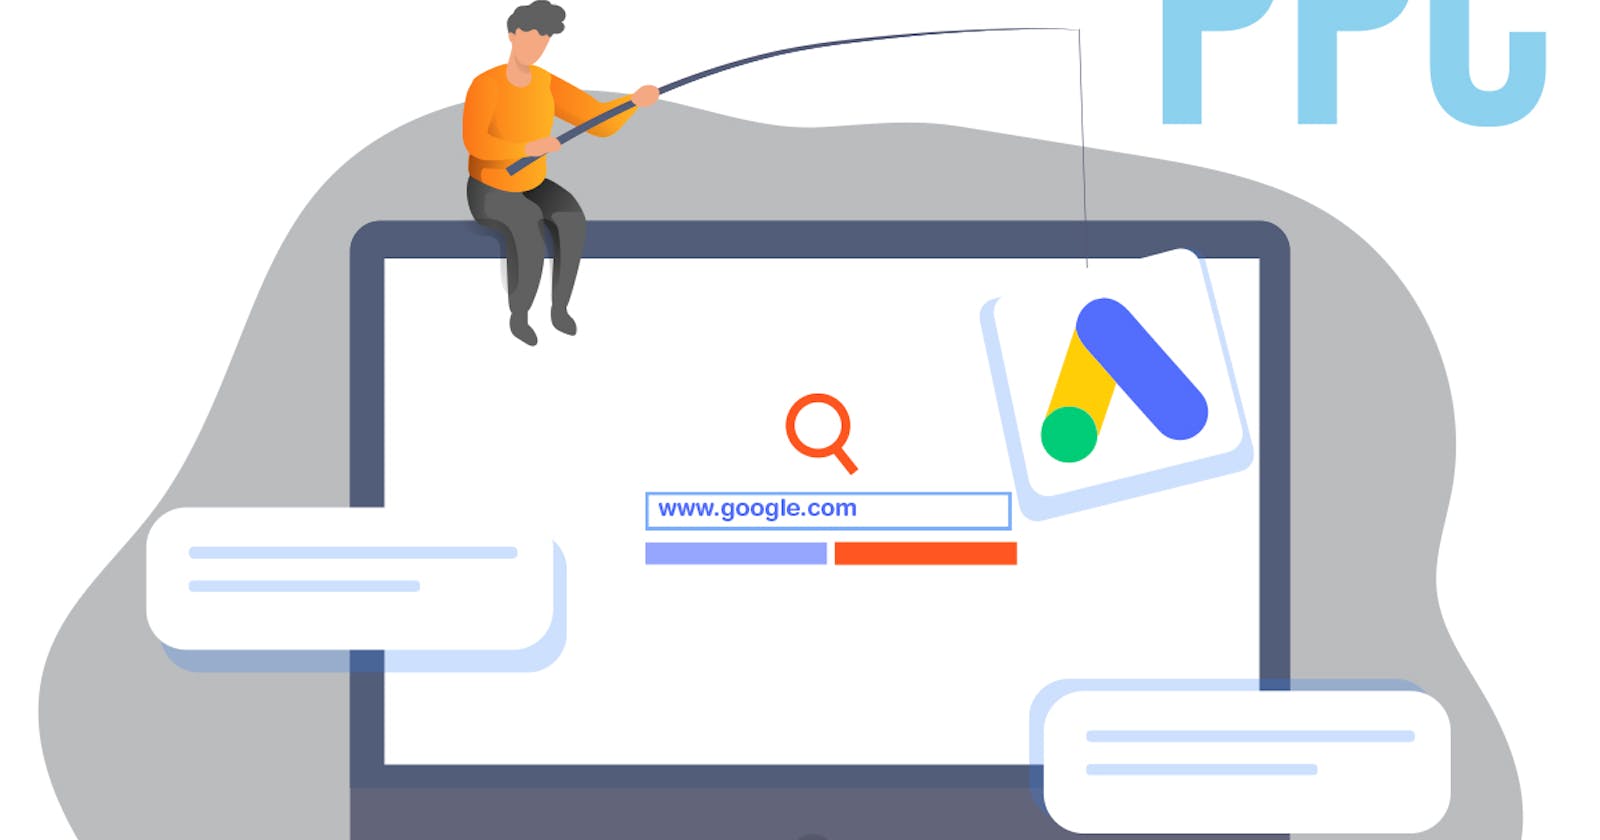 Becoming Great at Google Ads: Tools, Tips & Best Practices Review